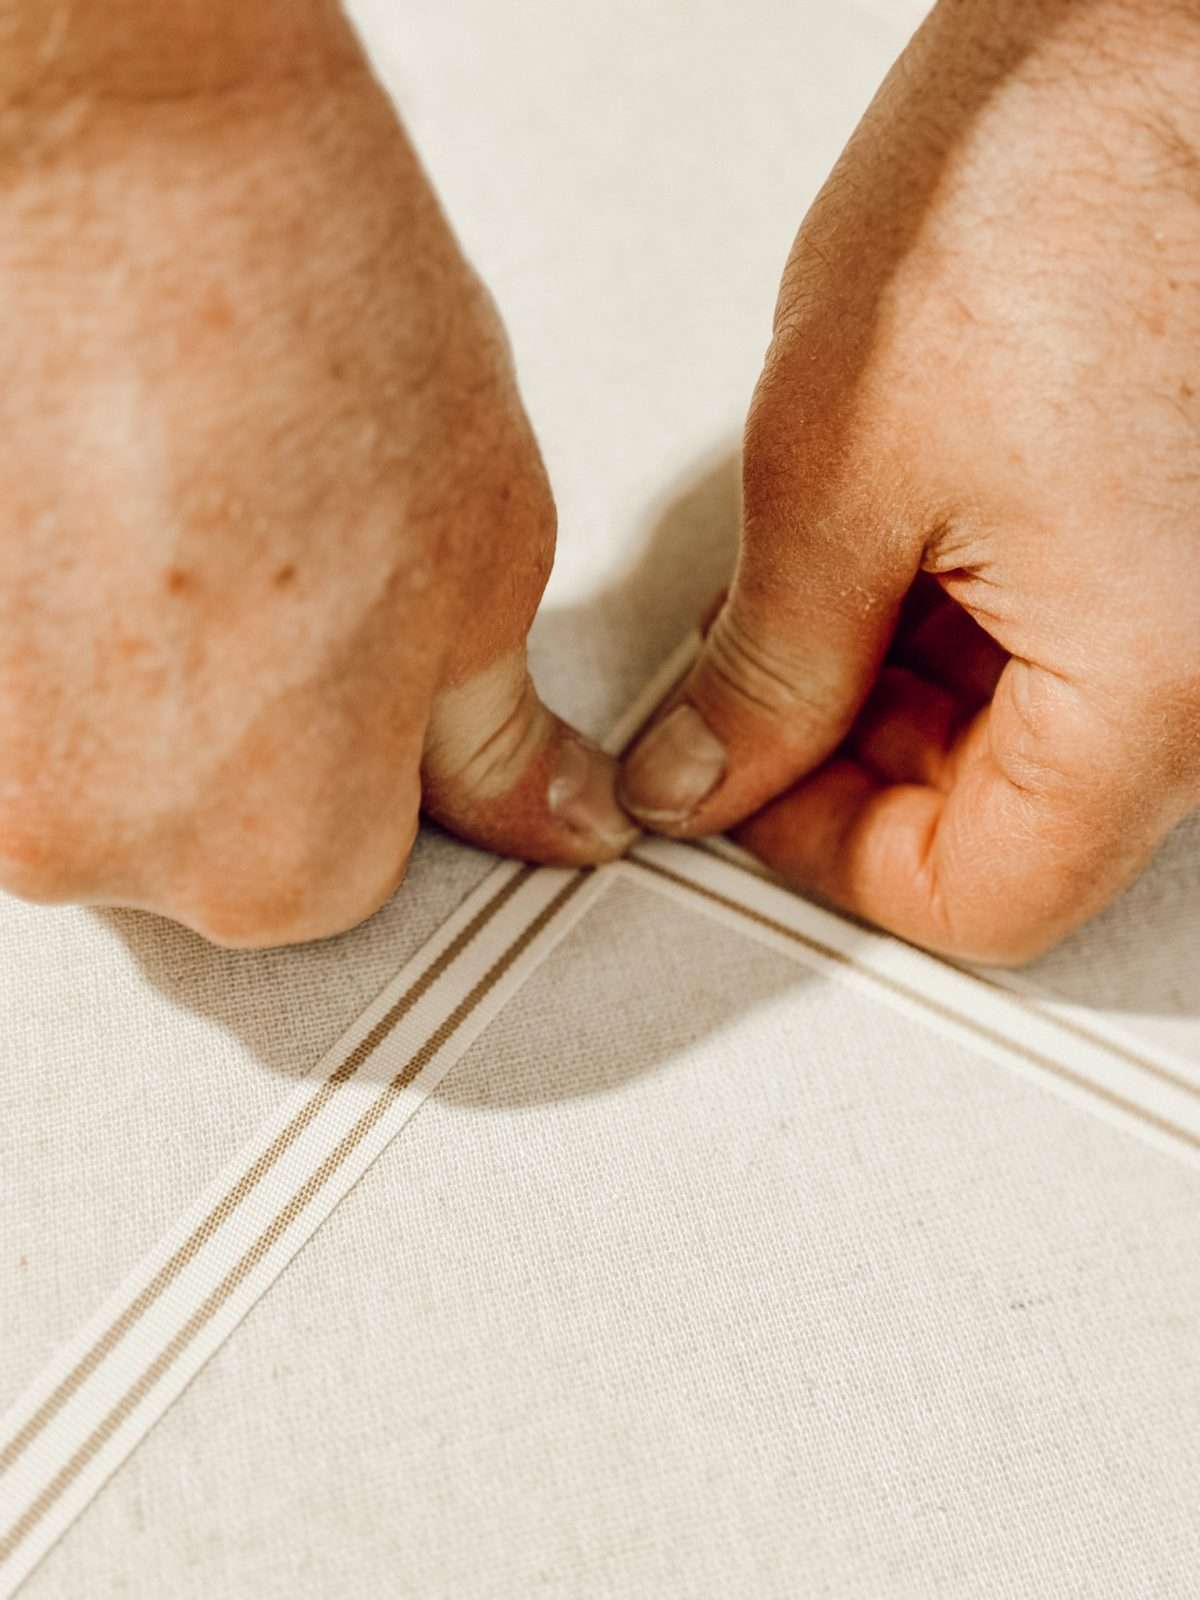 Push the upholstery nail into the pin board to finish the DIY project.